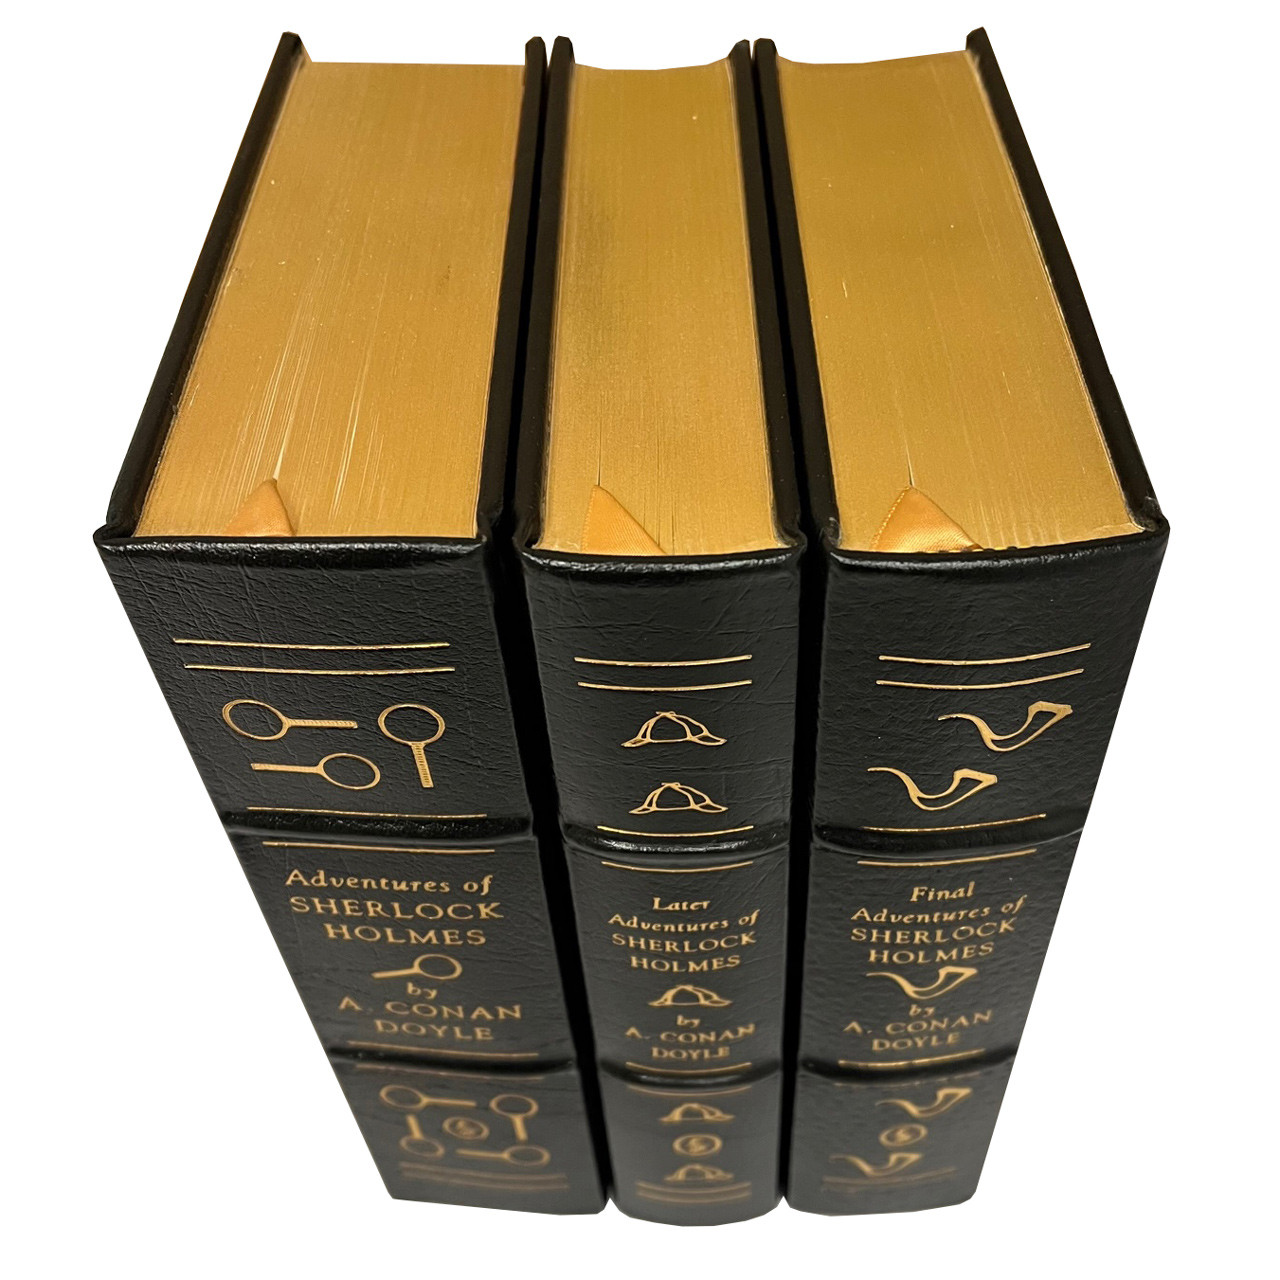 Sir Arthur Conan Doyle  "The Complete Sherlock Holmes: 100th Anniversary Edition" Leather Bound Collector's Edition, 3-Vol. Complete Matching Set